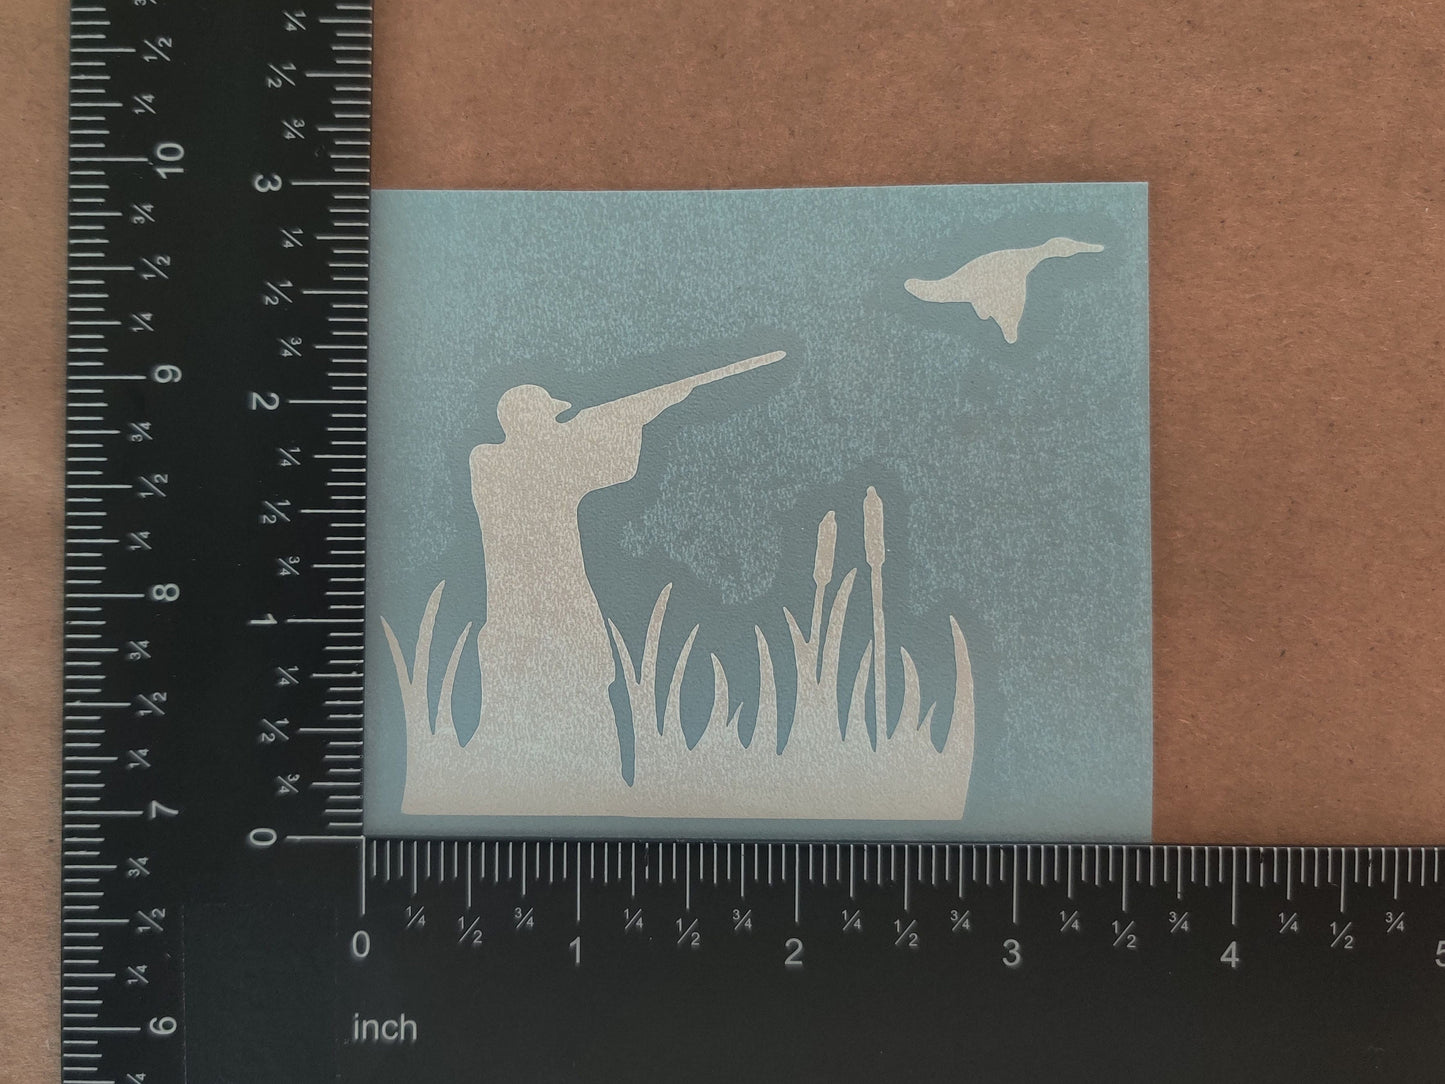 Duck Hunting Decals 4 Pack